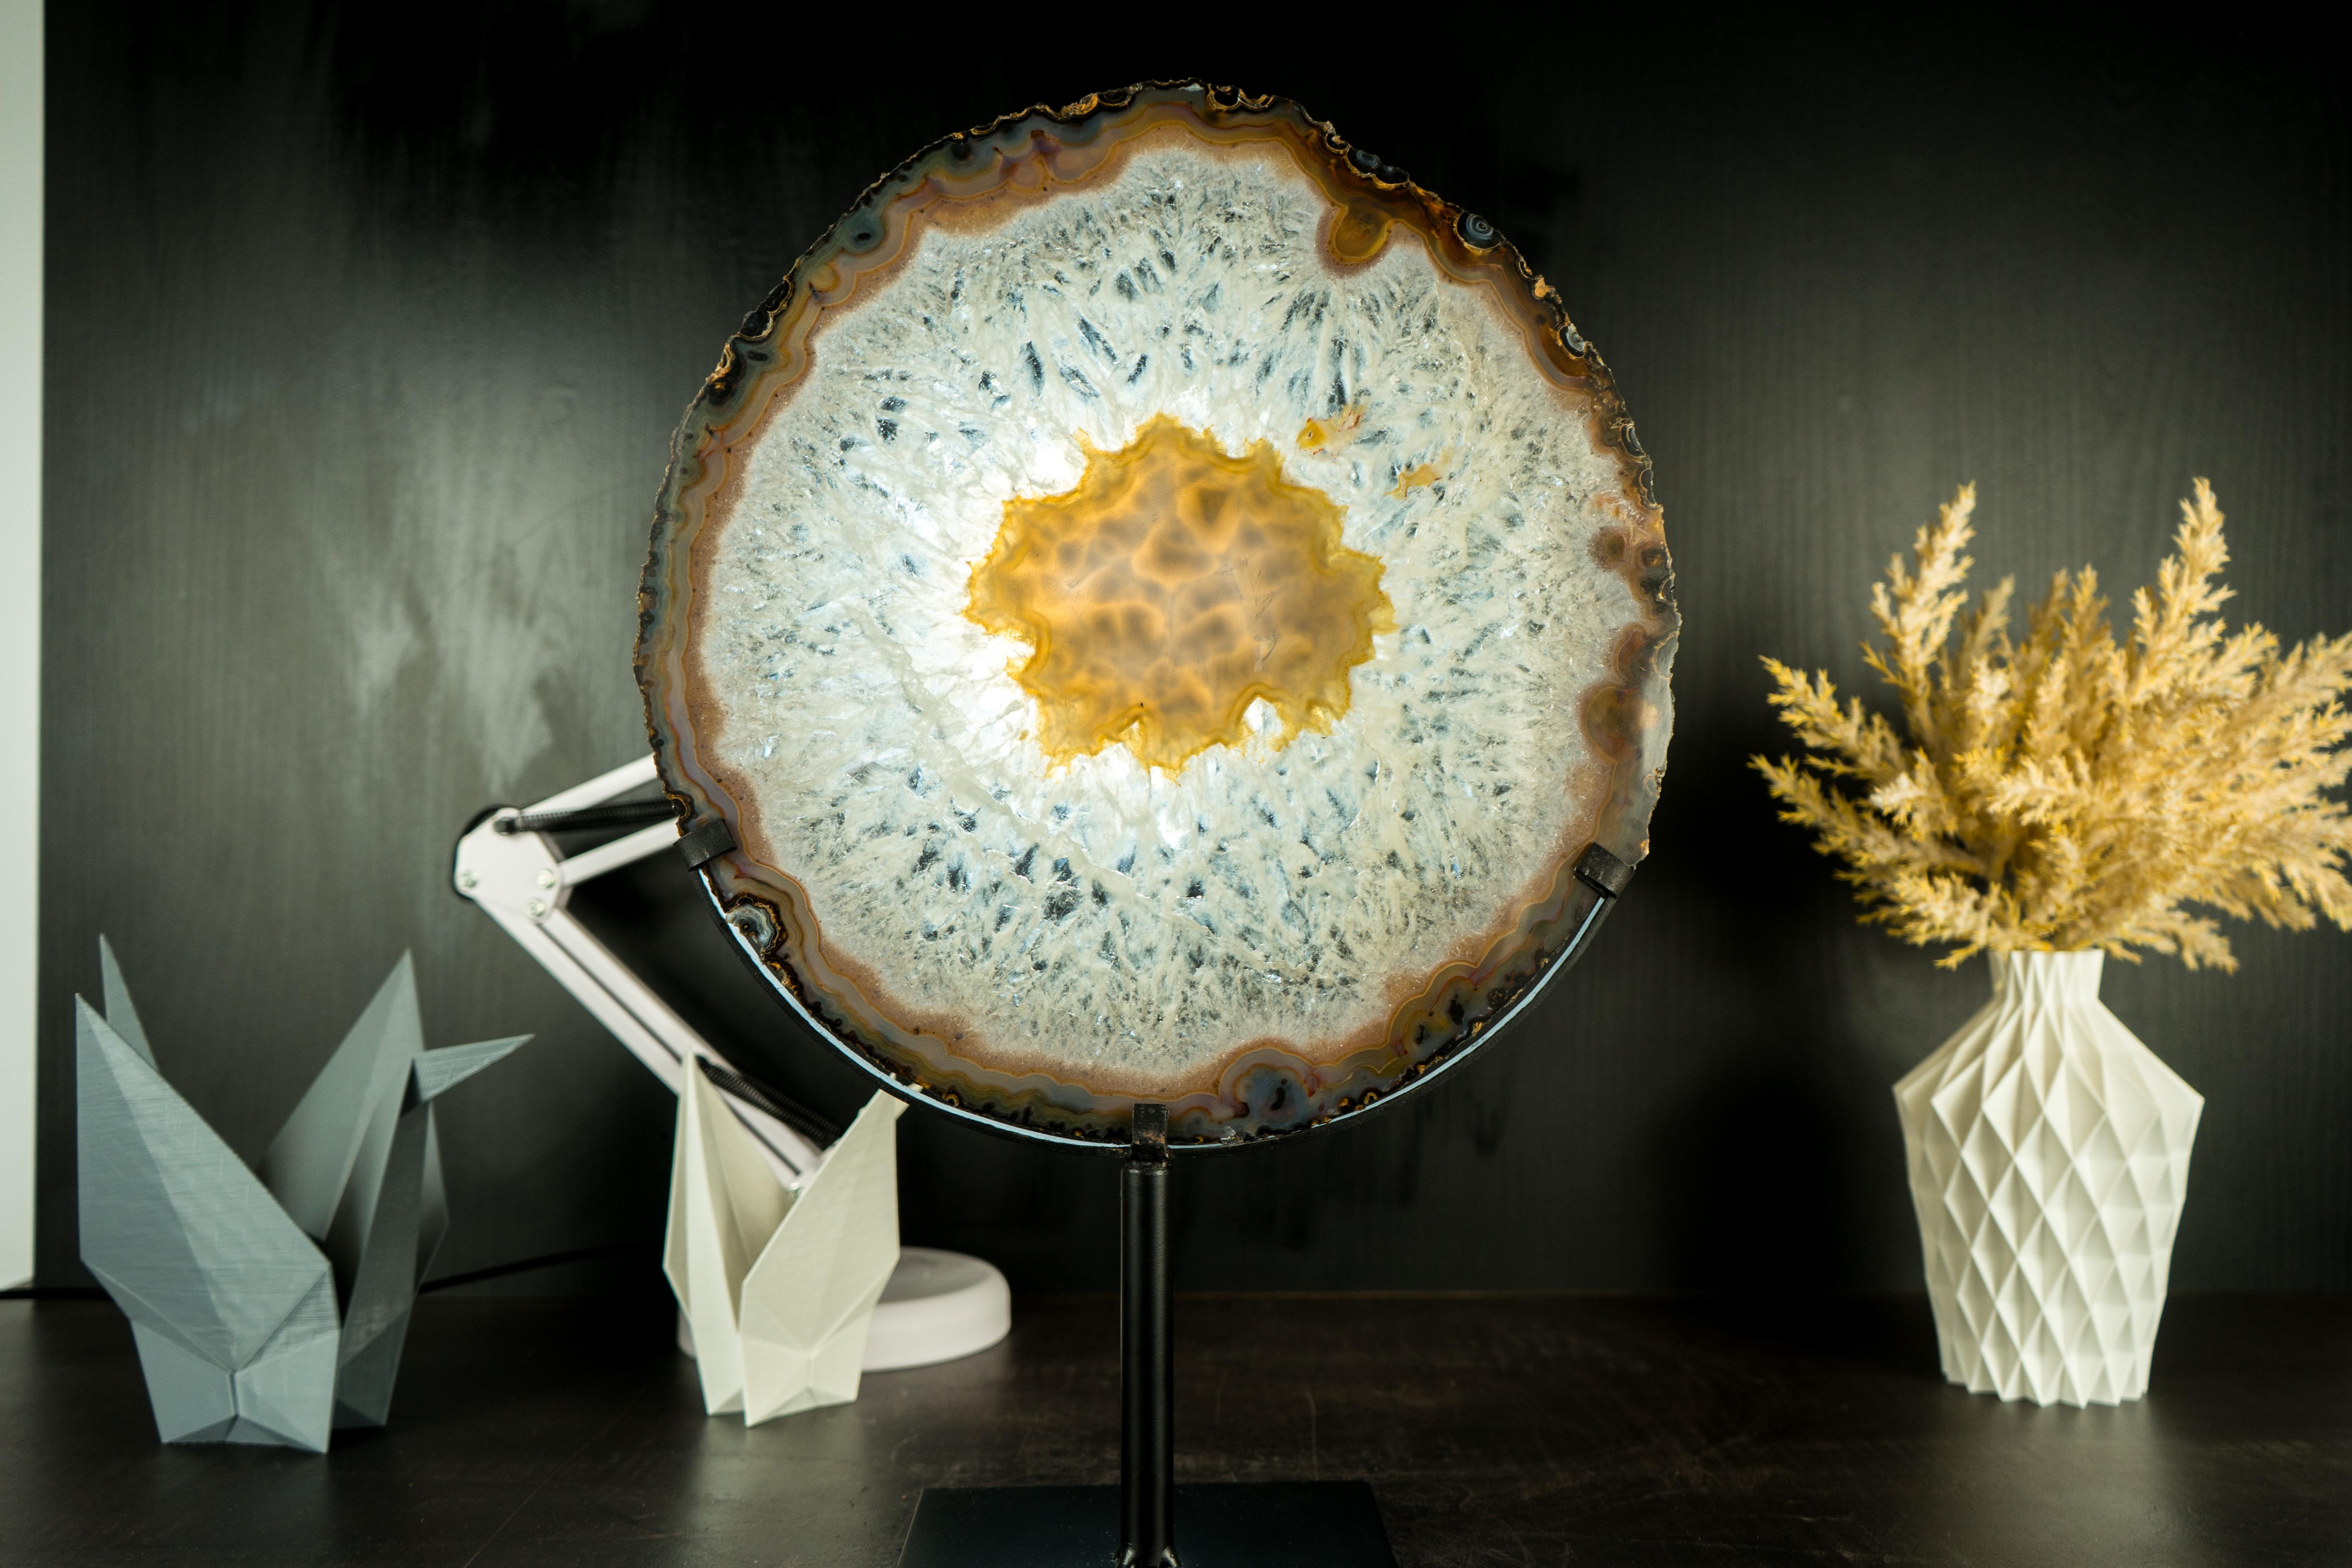 A Rare, Natural Masterpiece: A Large Lace Agate Slice with a Clear Quartz Interior, Perfect Bandings and Colorful Chalcedony

▫️ Description

An agate slice that embodies the utmost in beauty, rarity, and perfection. This gallery-grade large agate